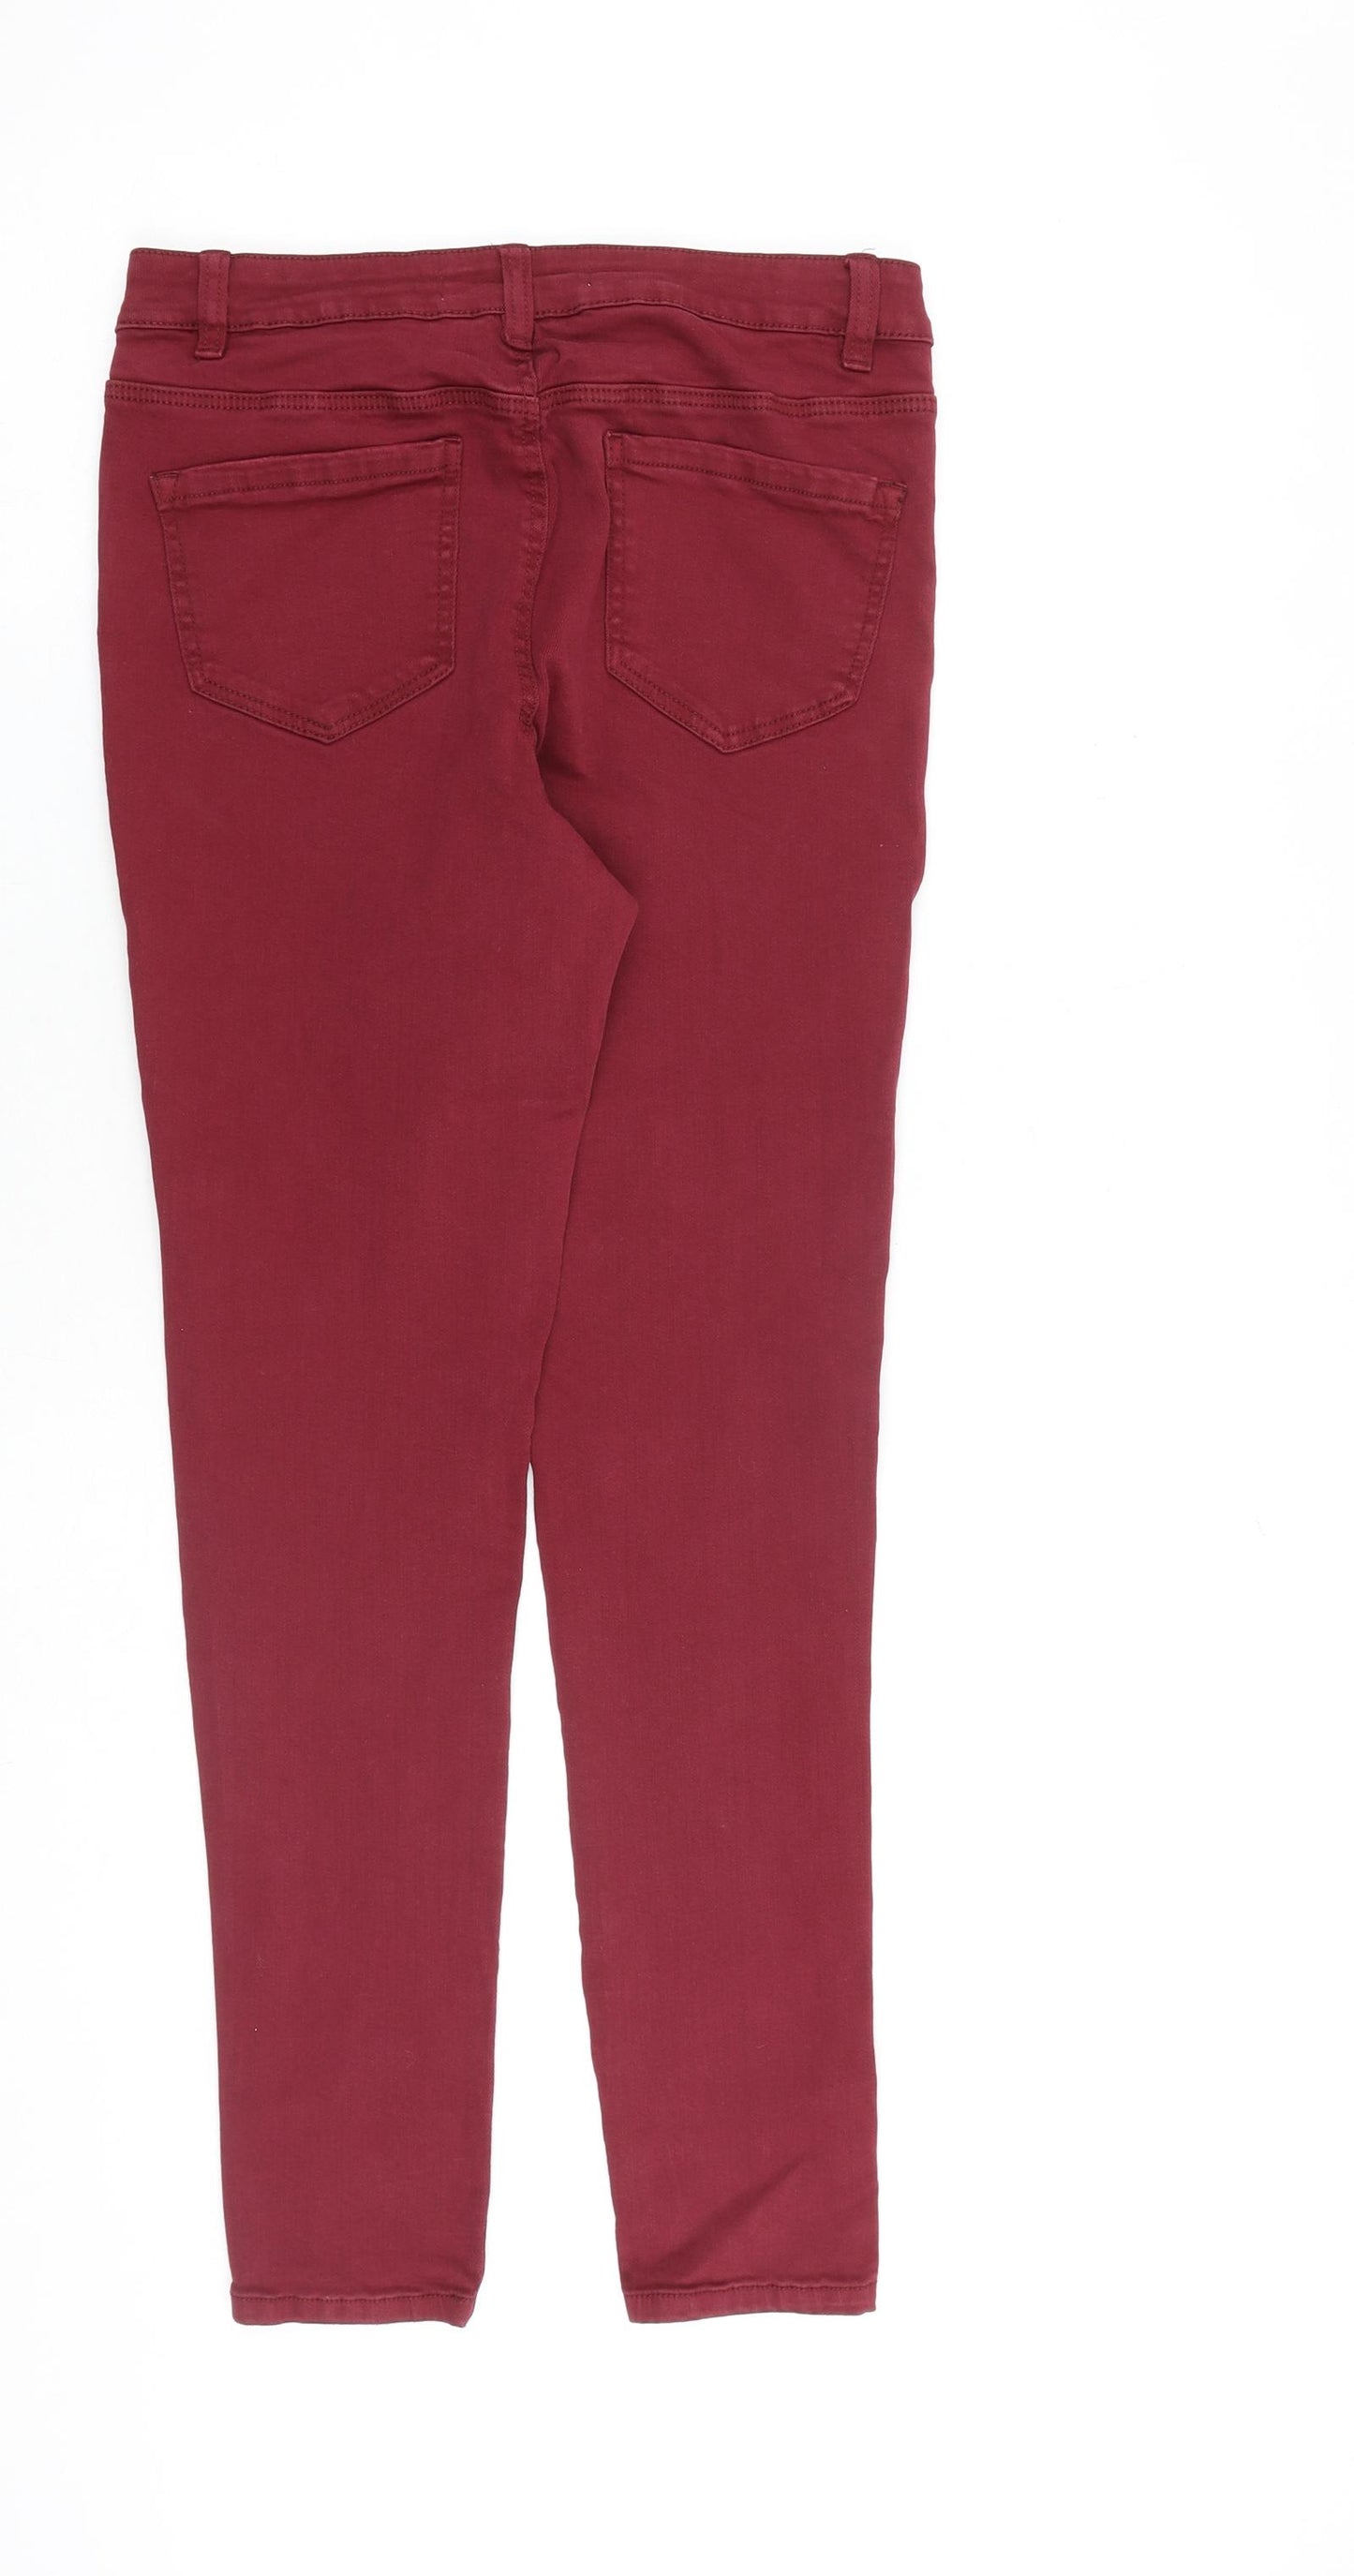 George Womens Red Cotton Skinny Jeans Size 12 L29 in Slim Zip